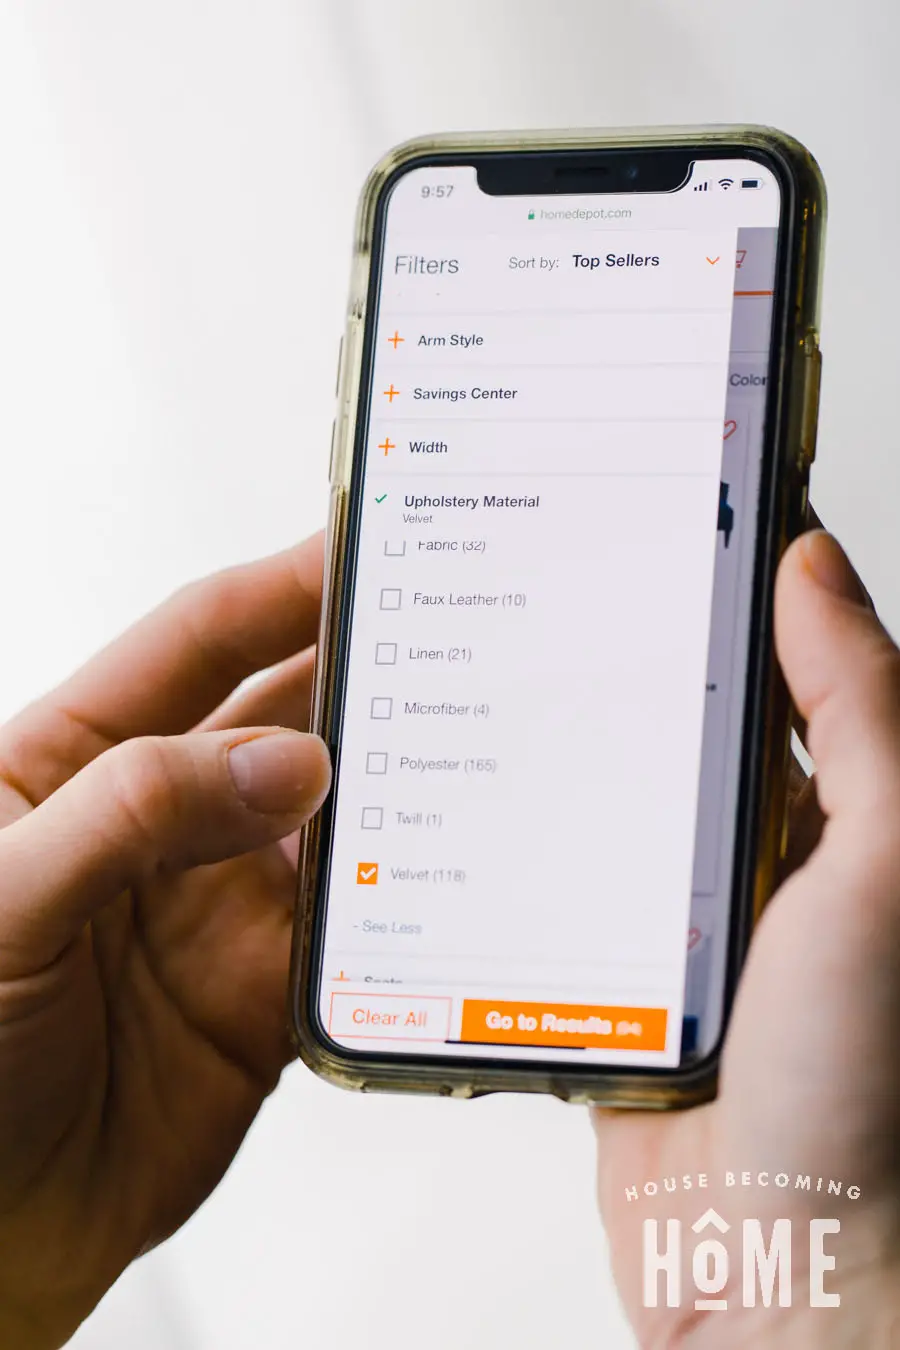 Using a Mobile Device to Order decor from Home Depot